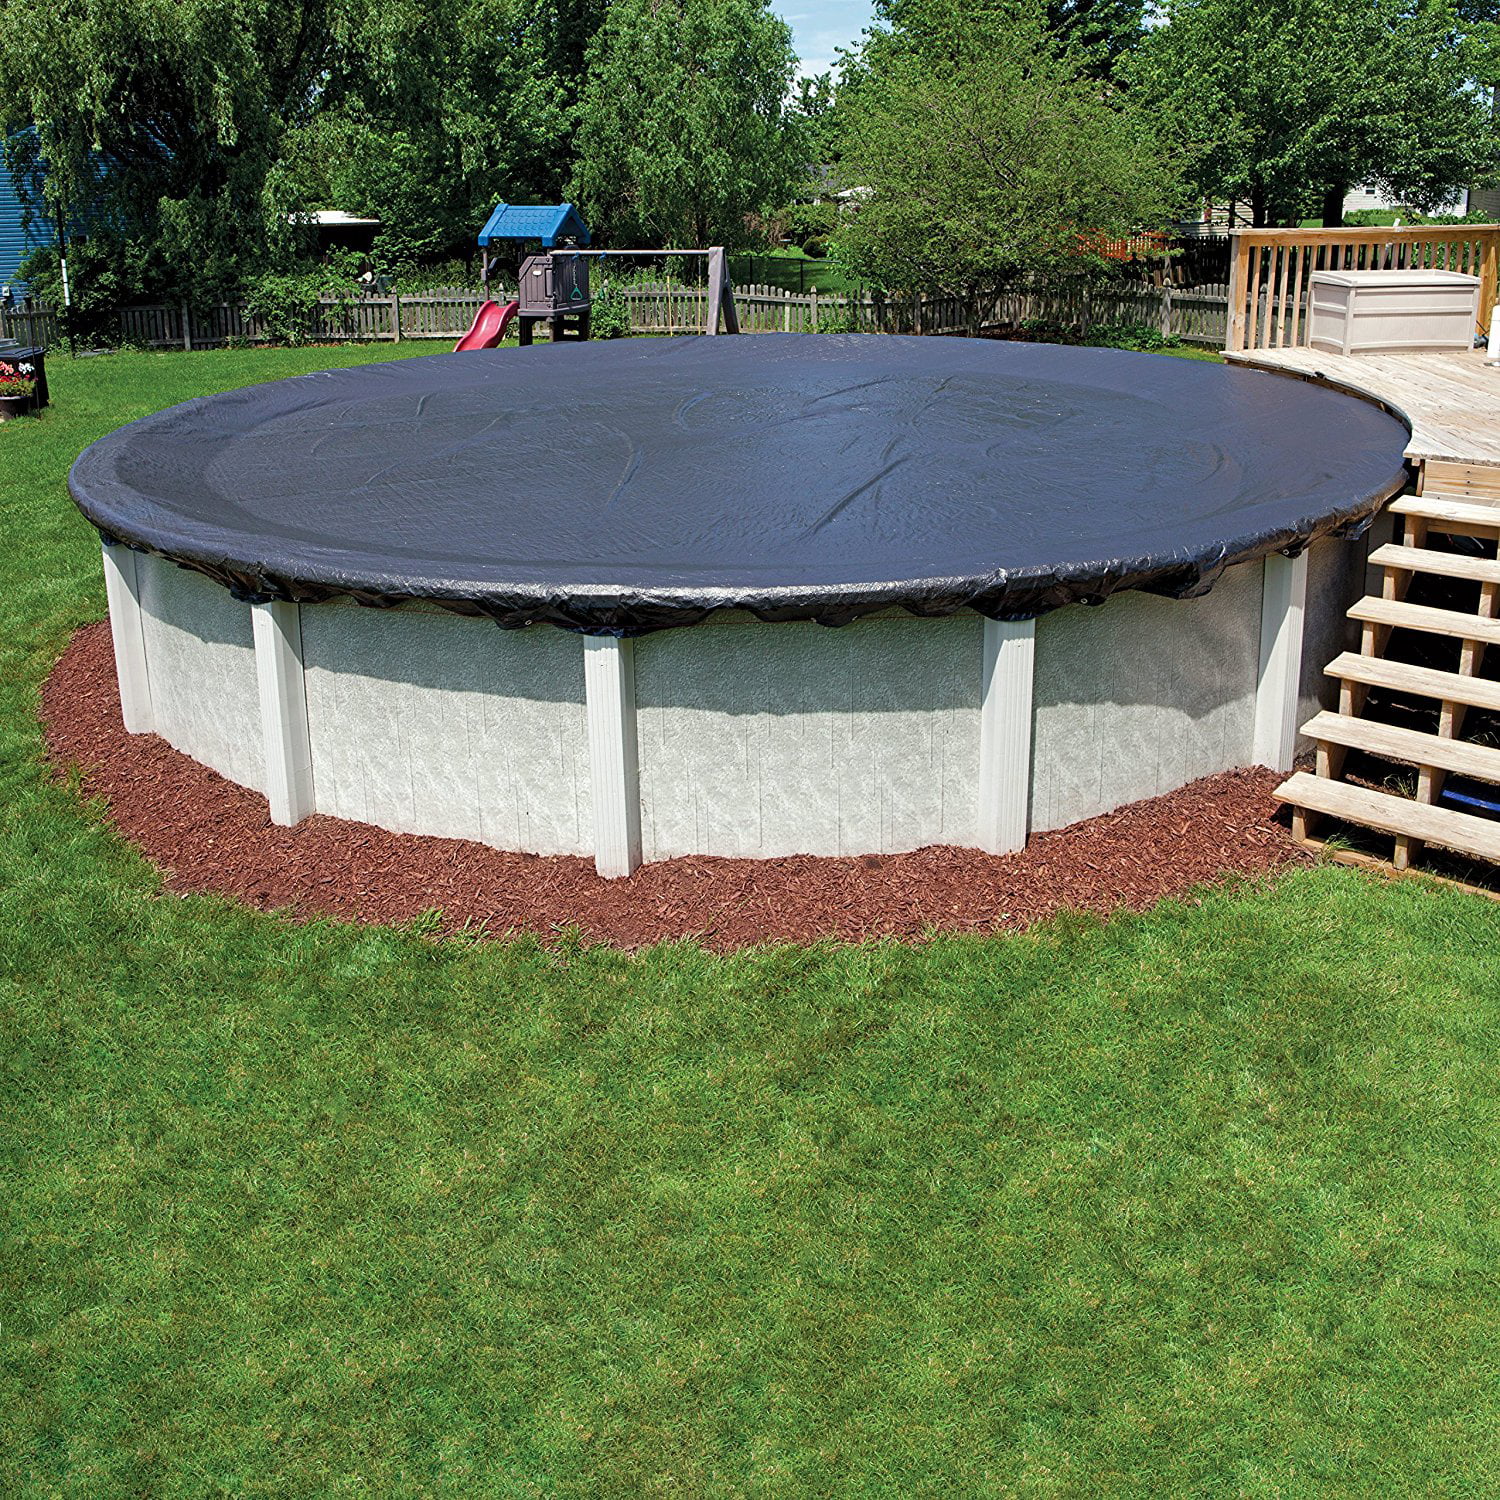 8 Year 18 Ft Round Pool Winter Covers, How To Cover Above Ground Pool With Deck For Winter